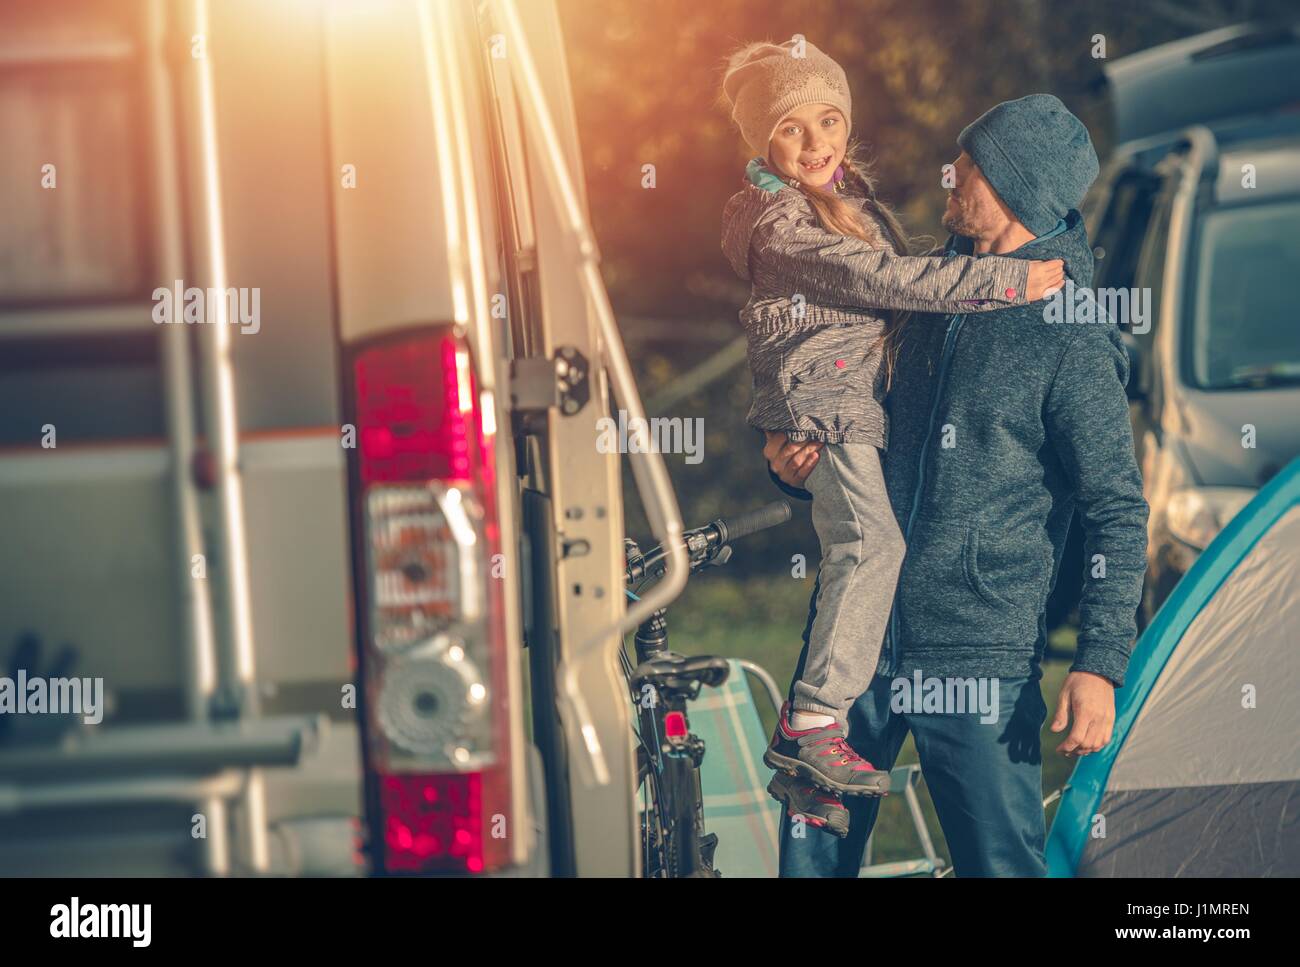 Father Daughter and the Campsite. Family Fun Concept Photo. Camper Van and the Tent. Stock Photo